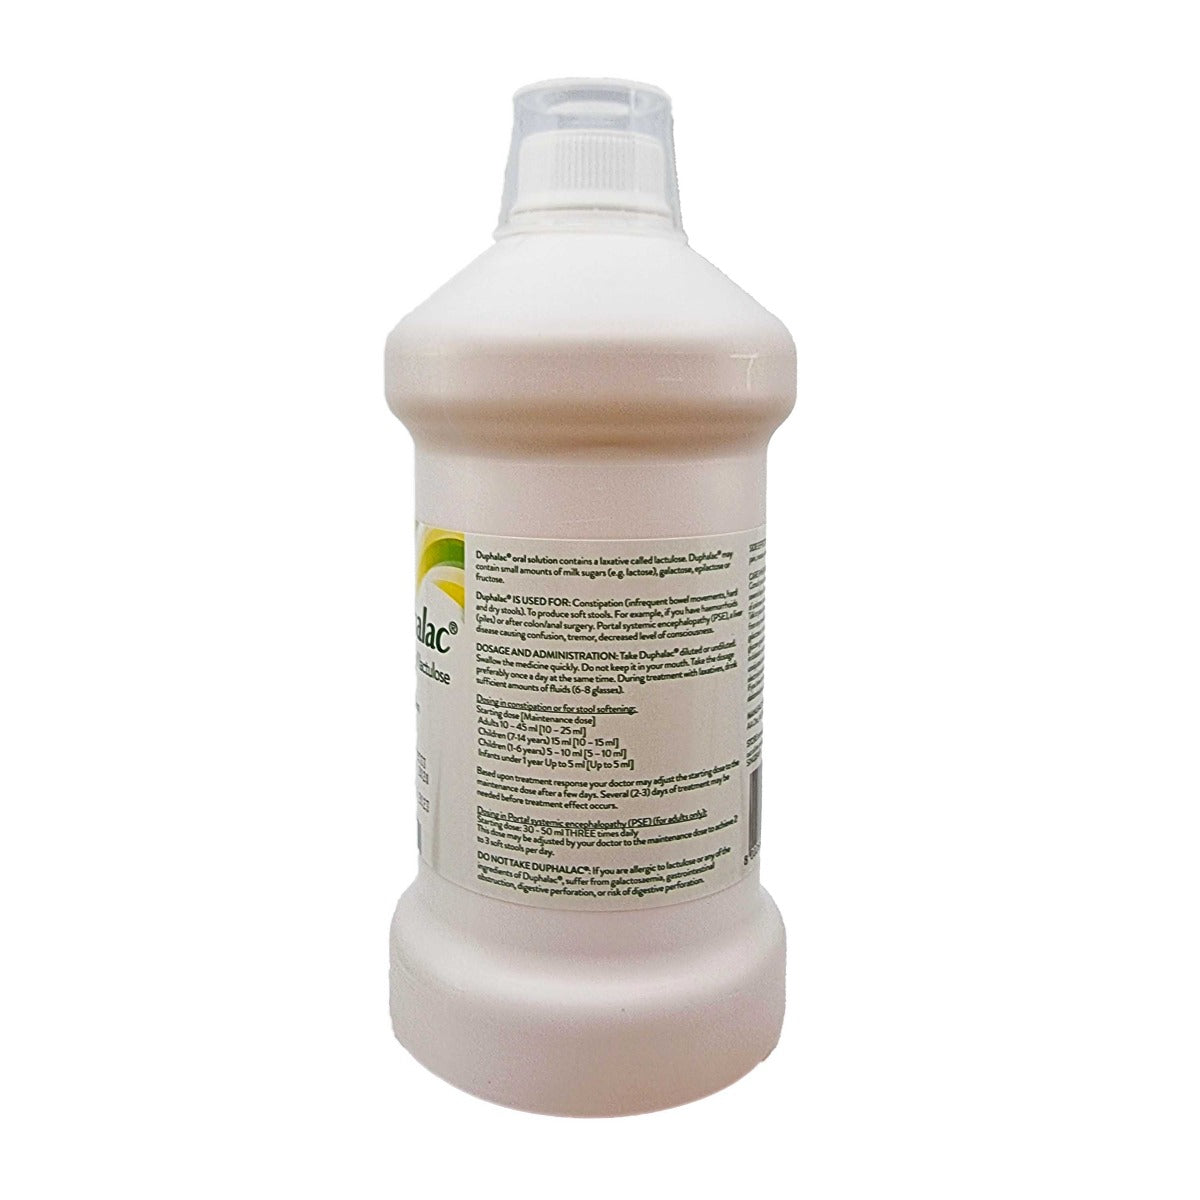 Duphalac Lactulose Oral Solution 1000ml Side